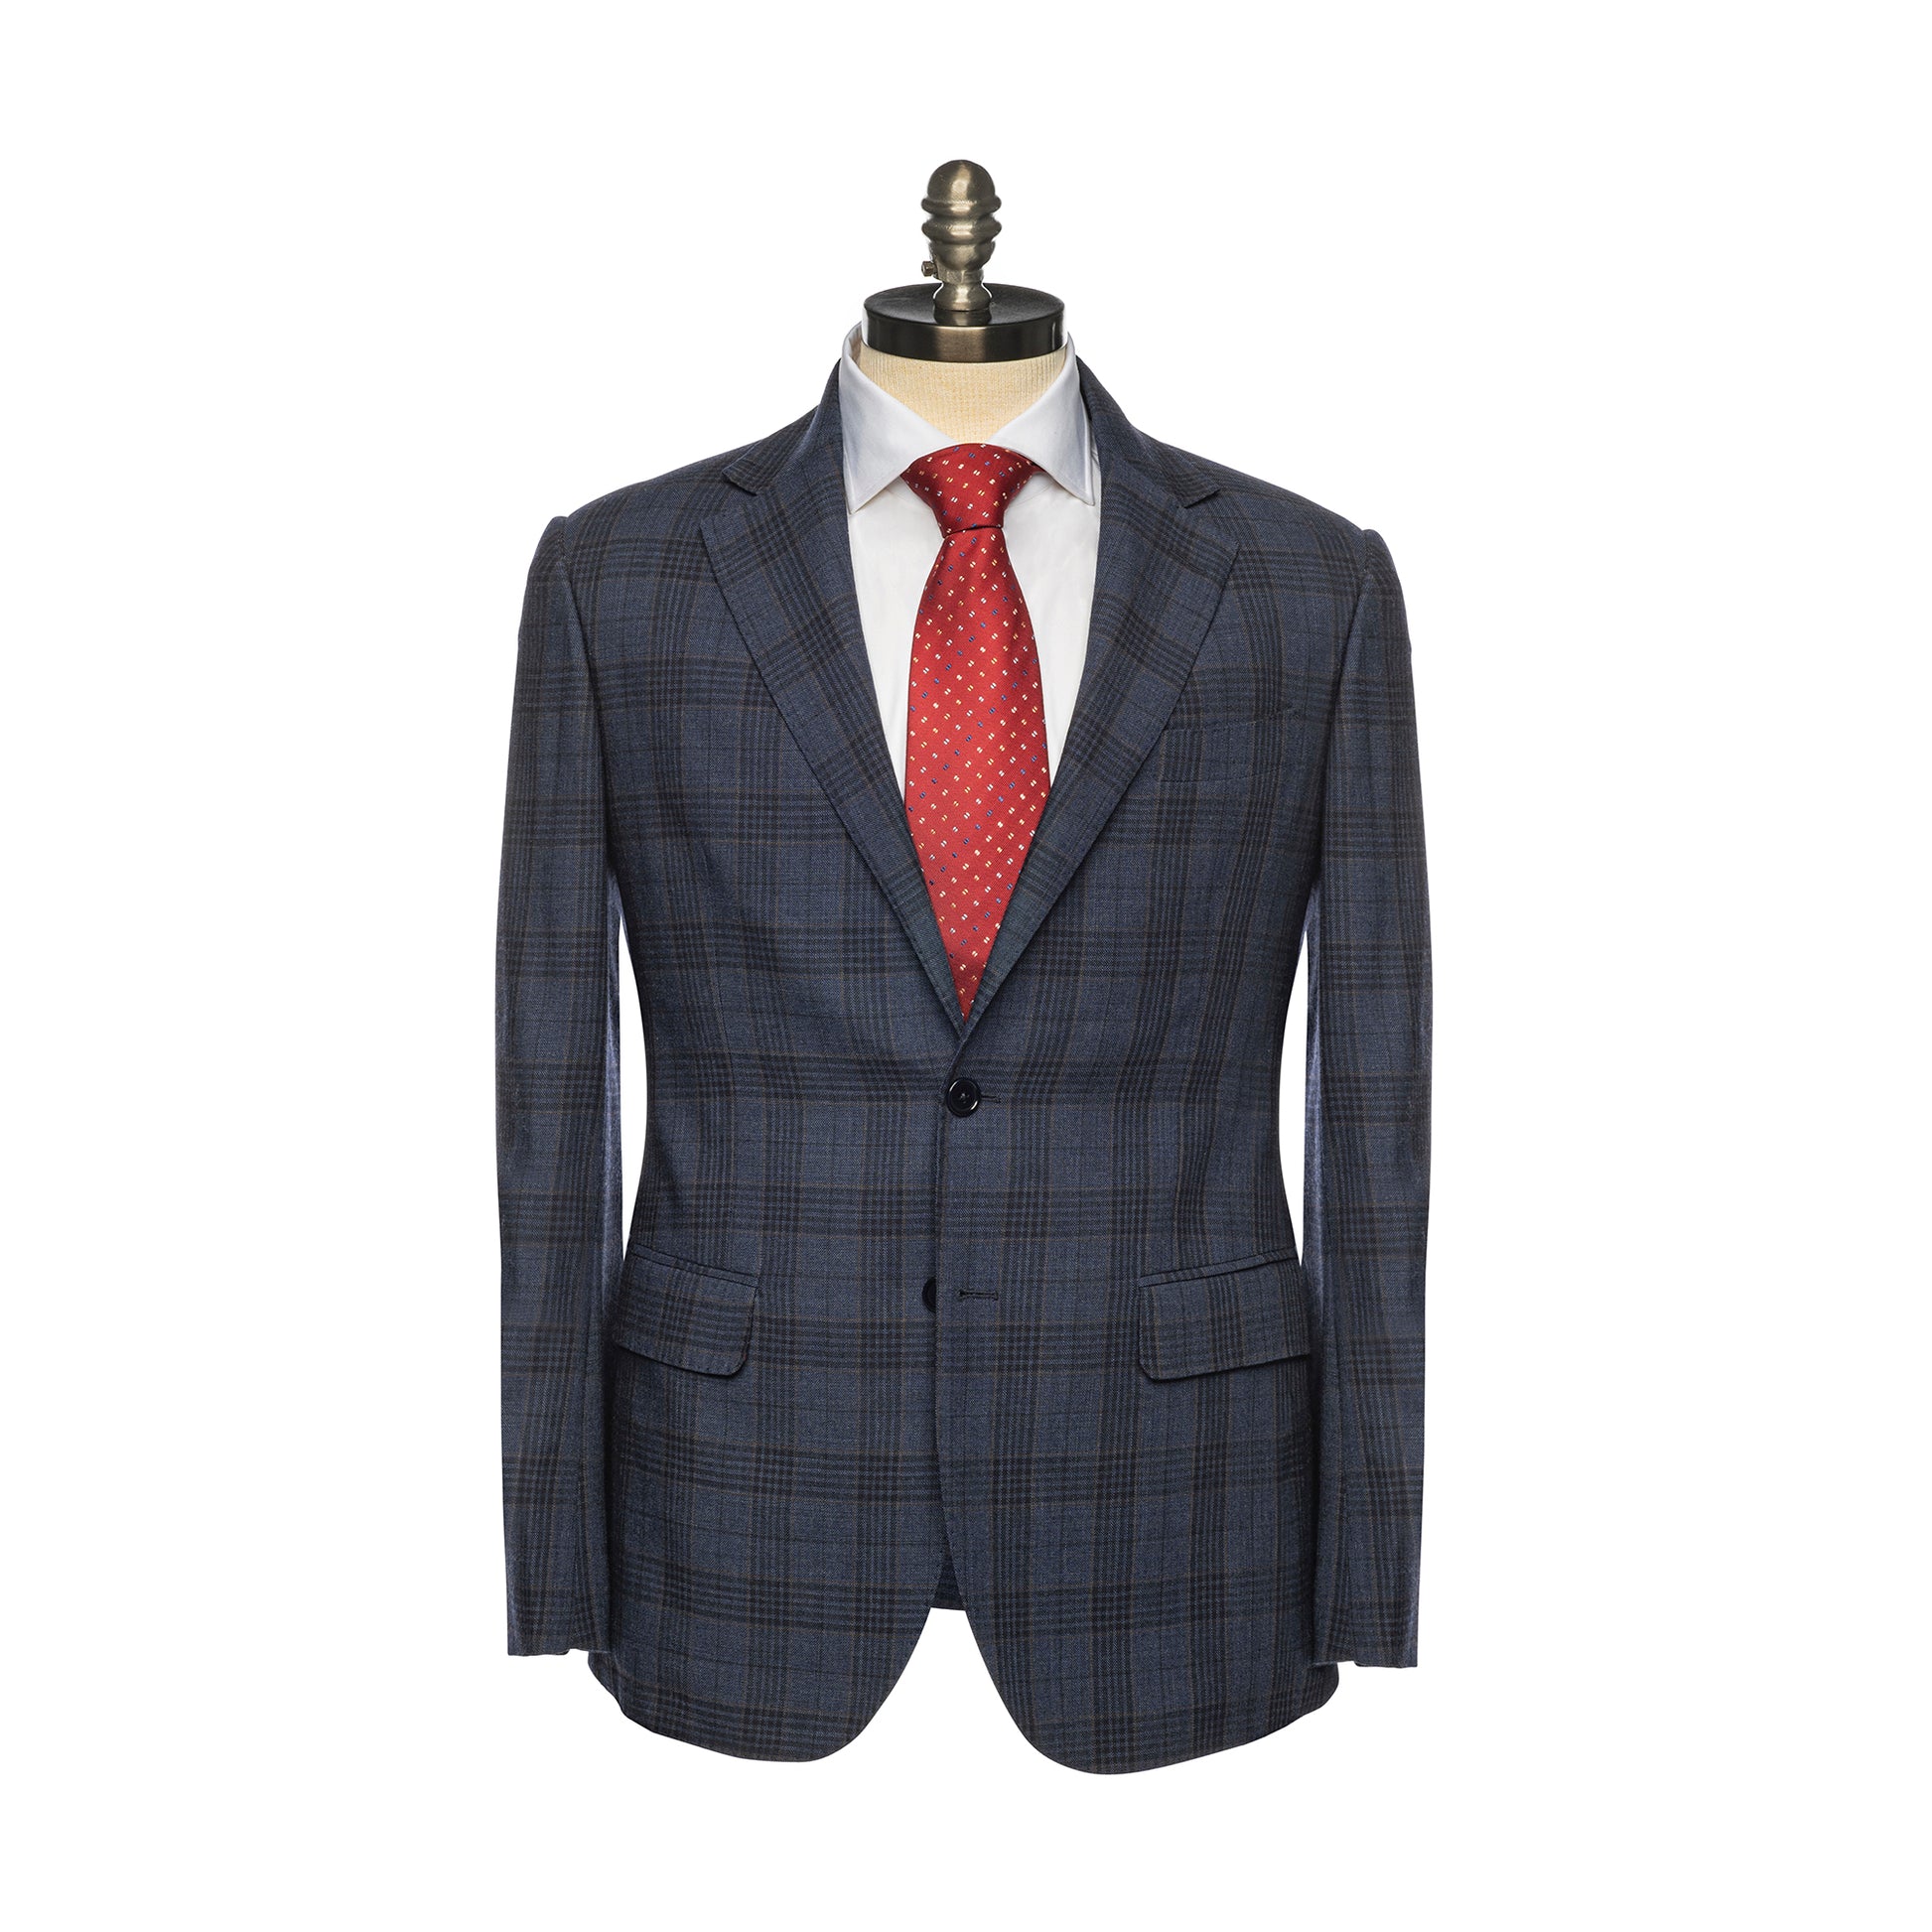 Two Pcs BLUE AND NAVY SUIT for Men